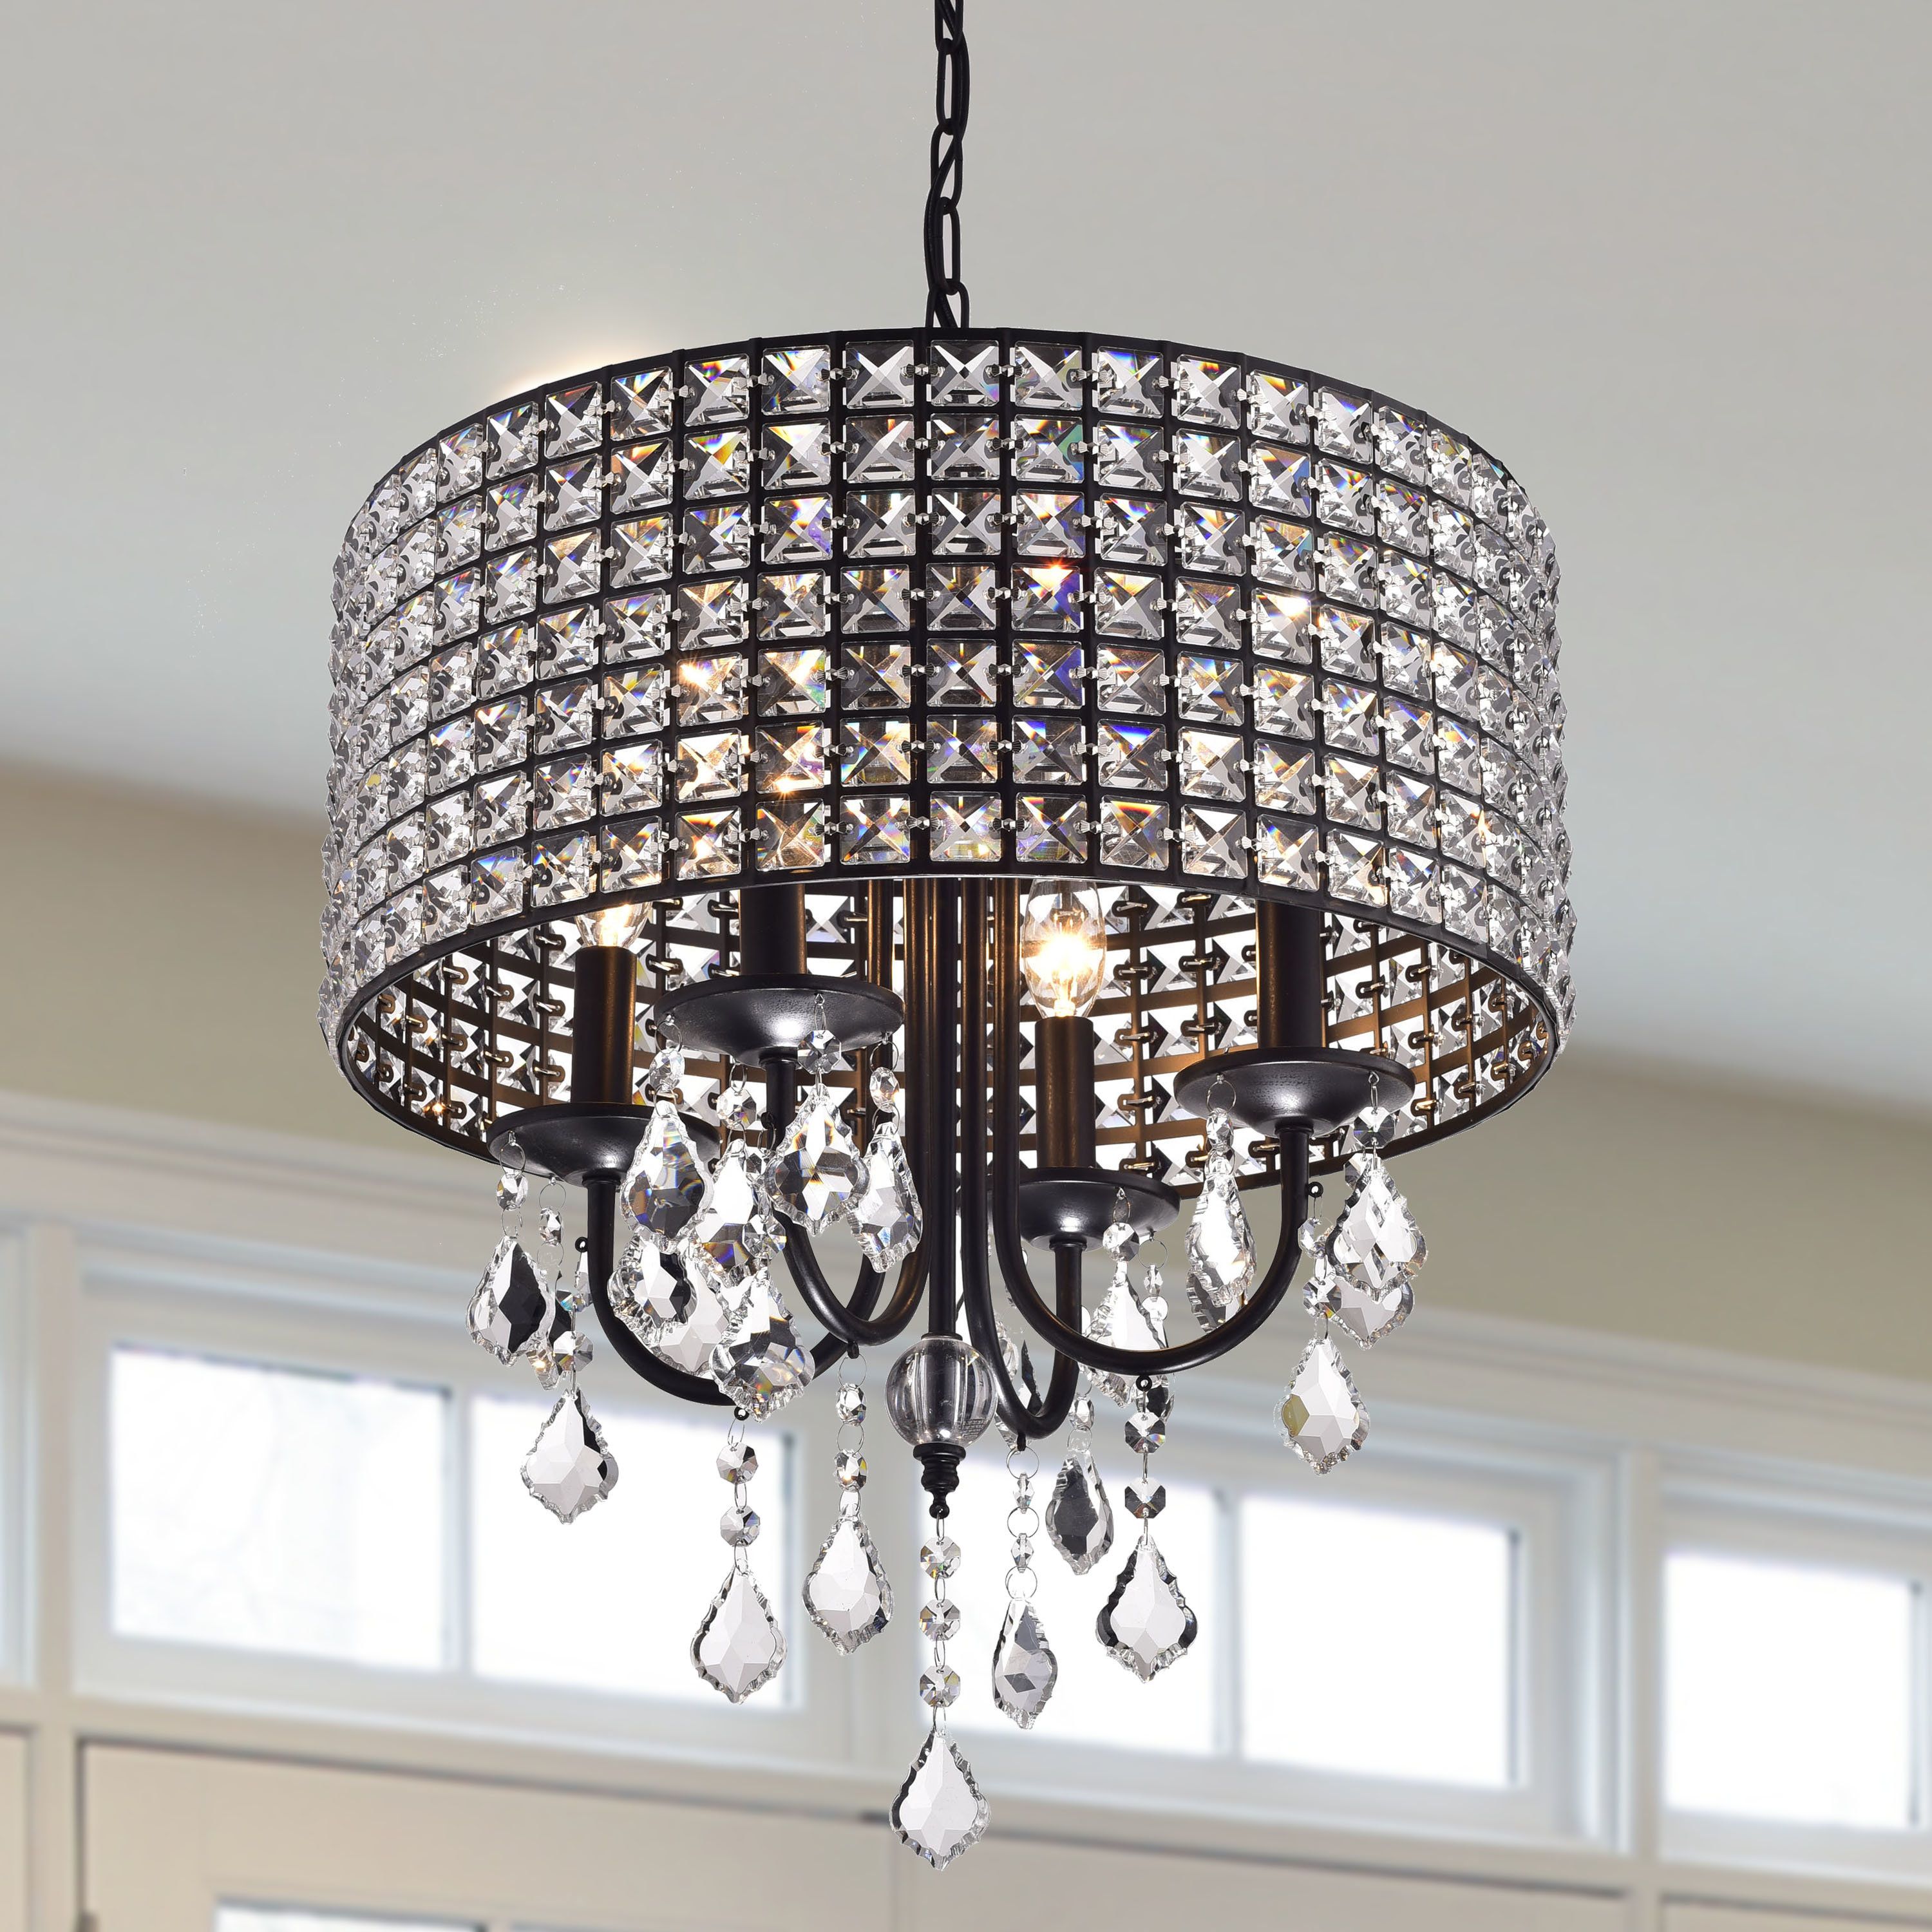 Albano 4 Light Crystal Chandelier Intended For Recent Albano 4 Light Crystal Chandeliers (View 1 of 25)